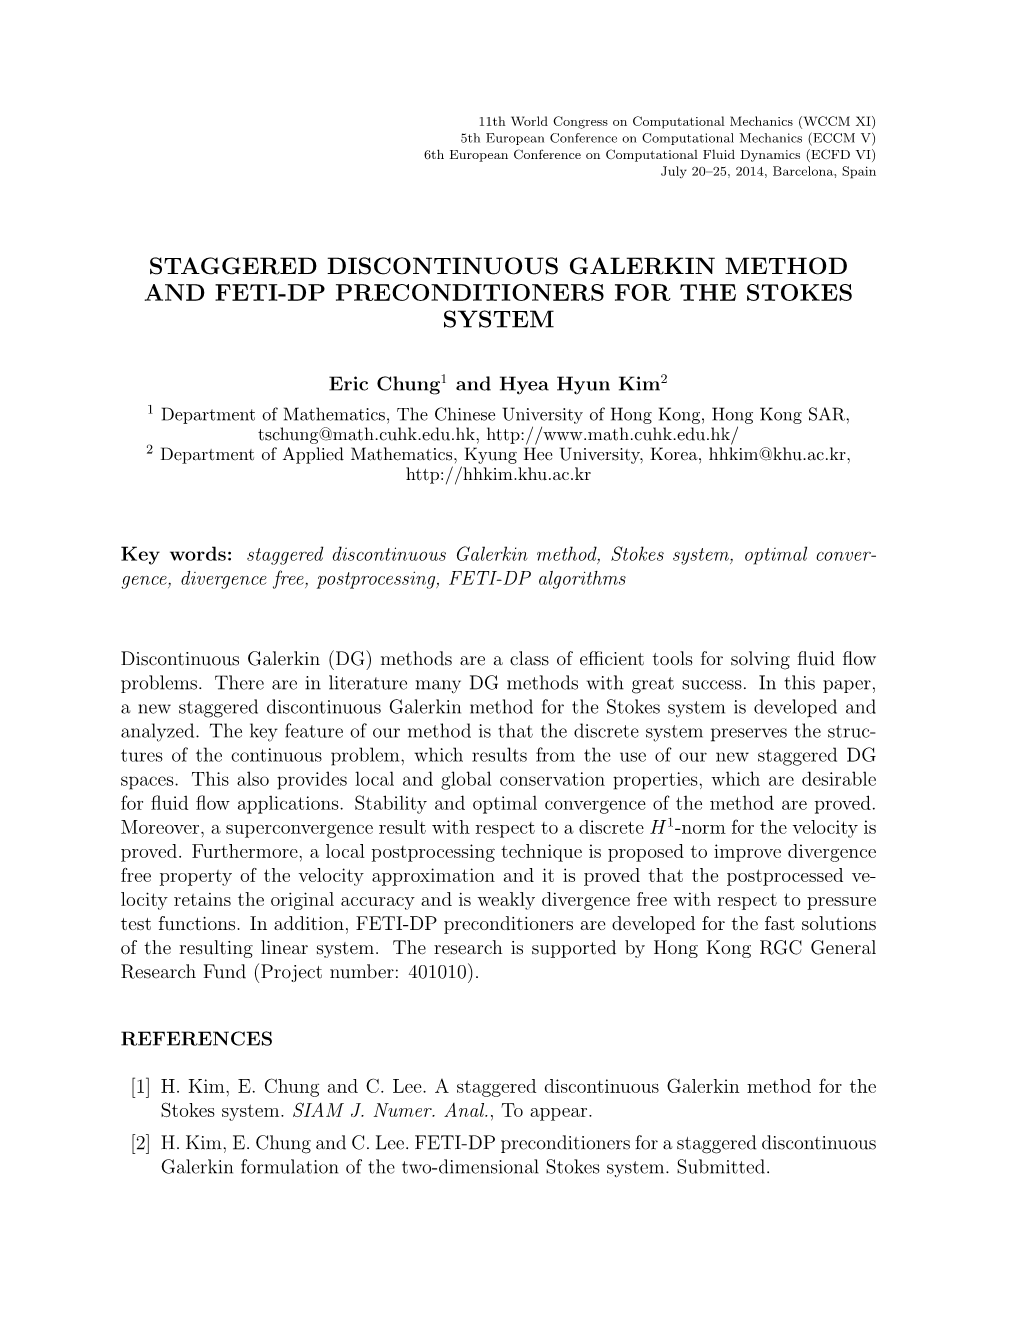 Staggered Discontinuous Galerkin Method and Feti-Dp Preconditioners for the Stokes System